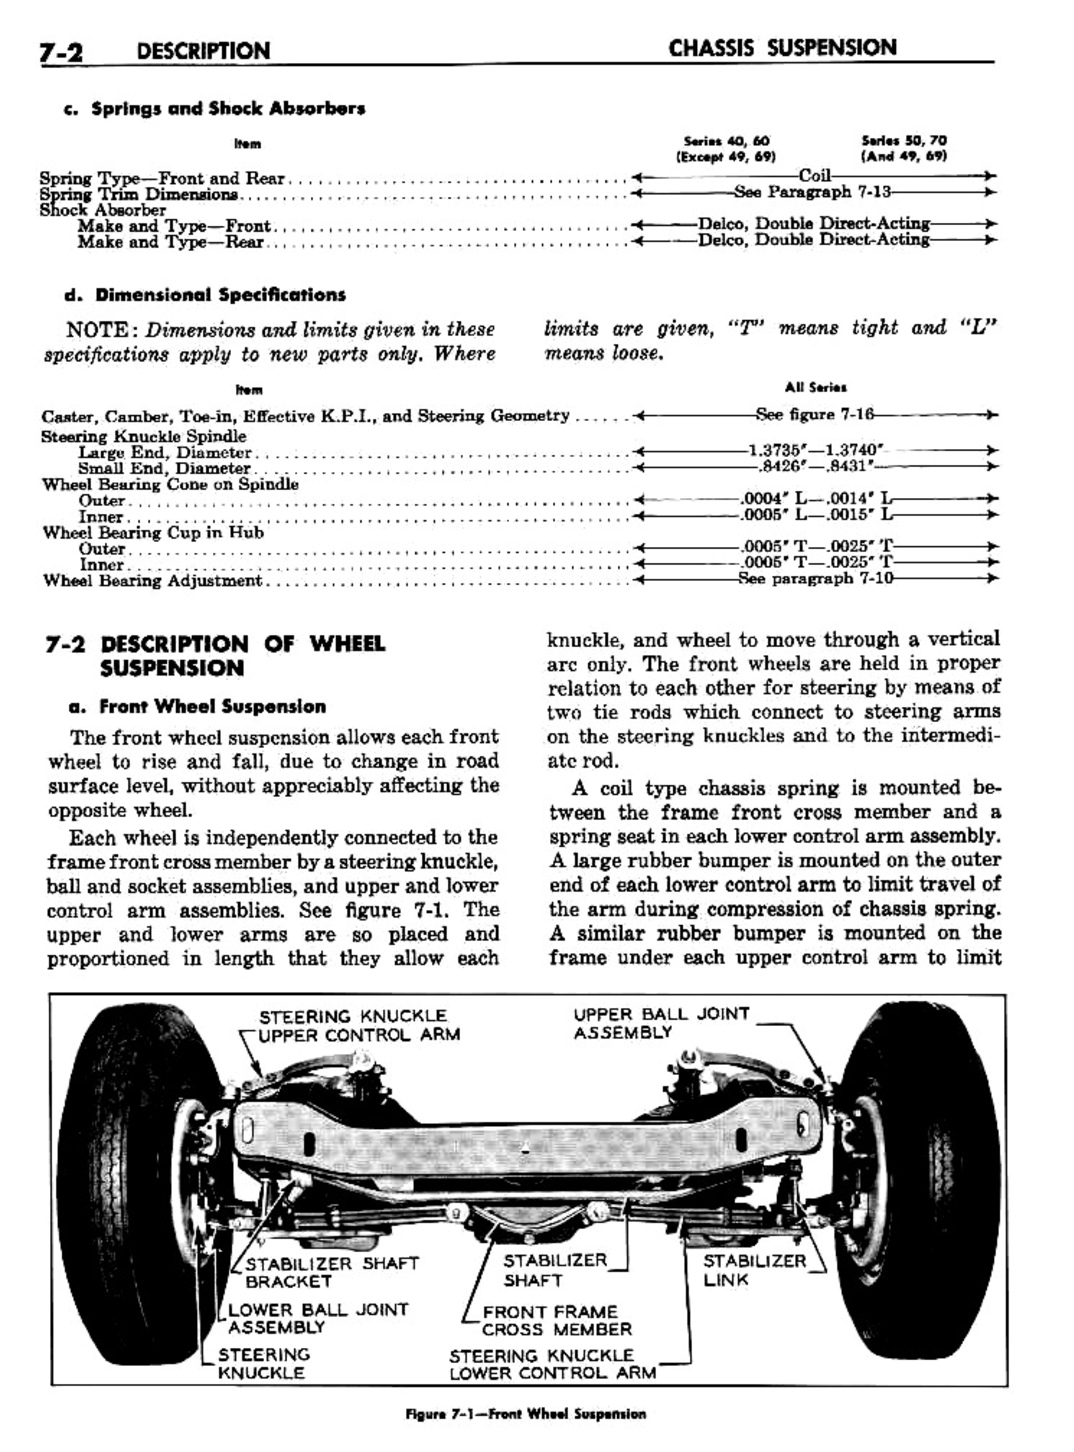 n_08 1957 Buick Shop Manual - Chassis Suspension-002-002.jpg